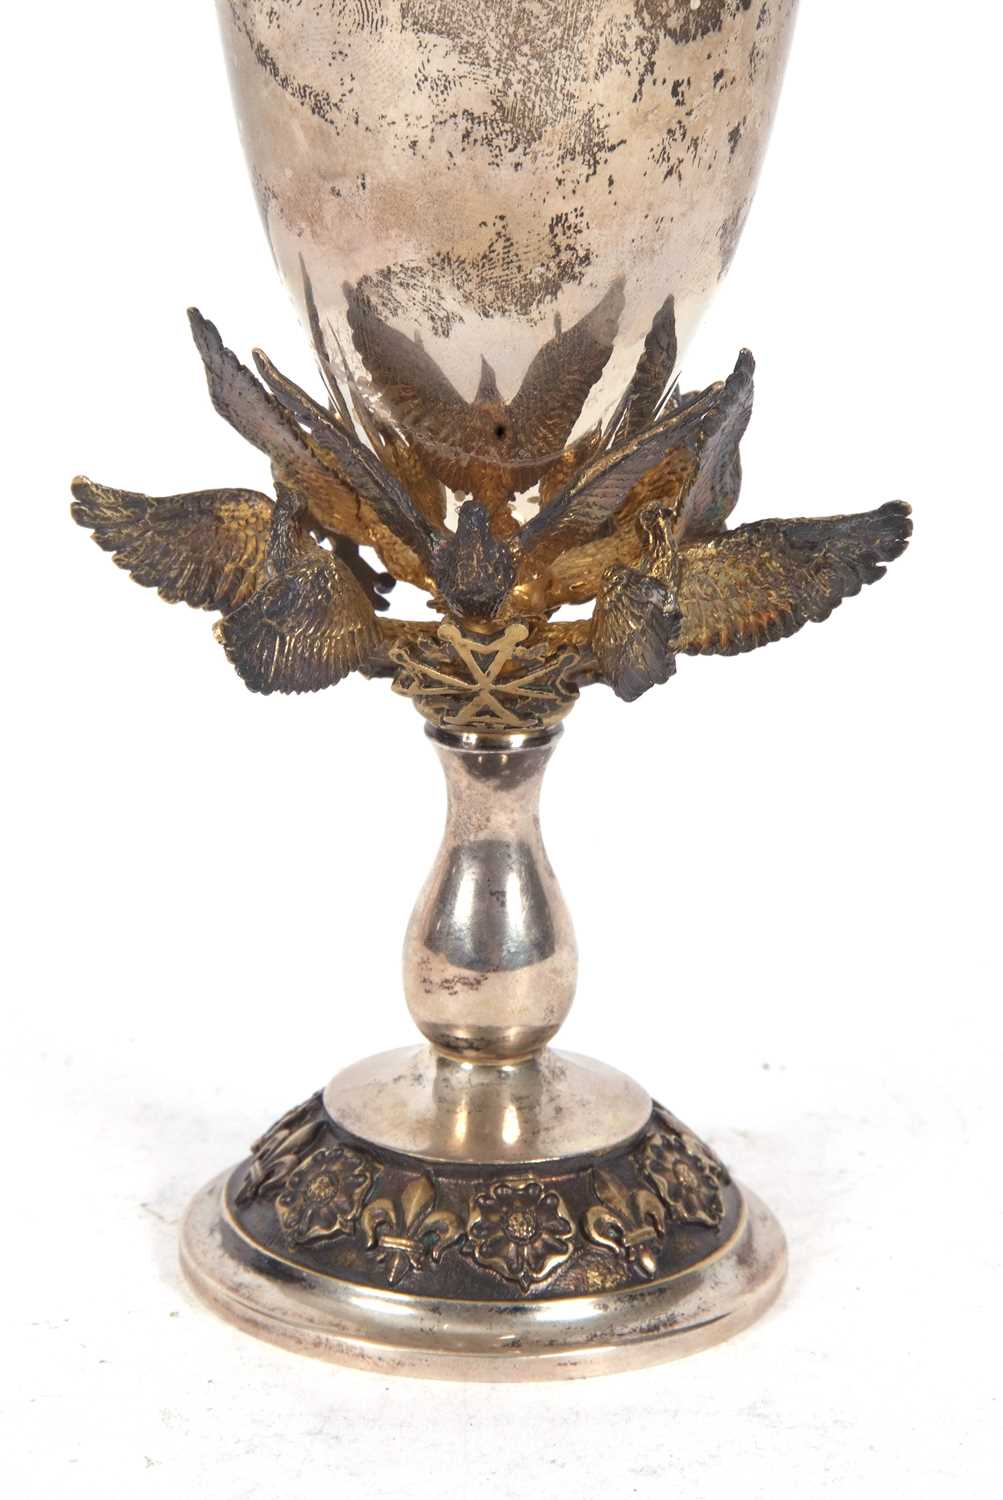 Aurum limited edition silver gilt goblet hallmarked for London 1986 produced to commemorate The - Image 7 of 7